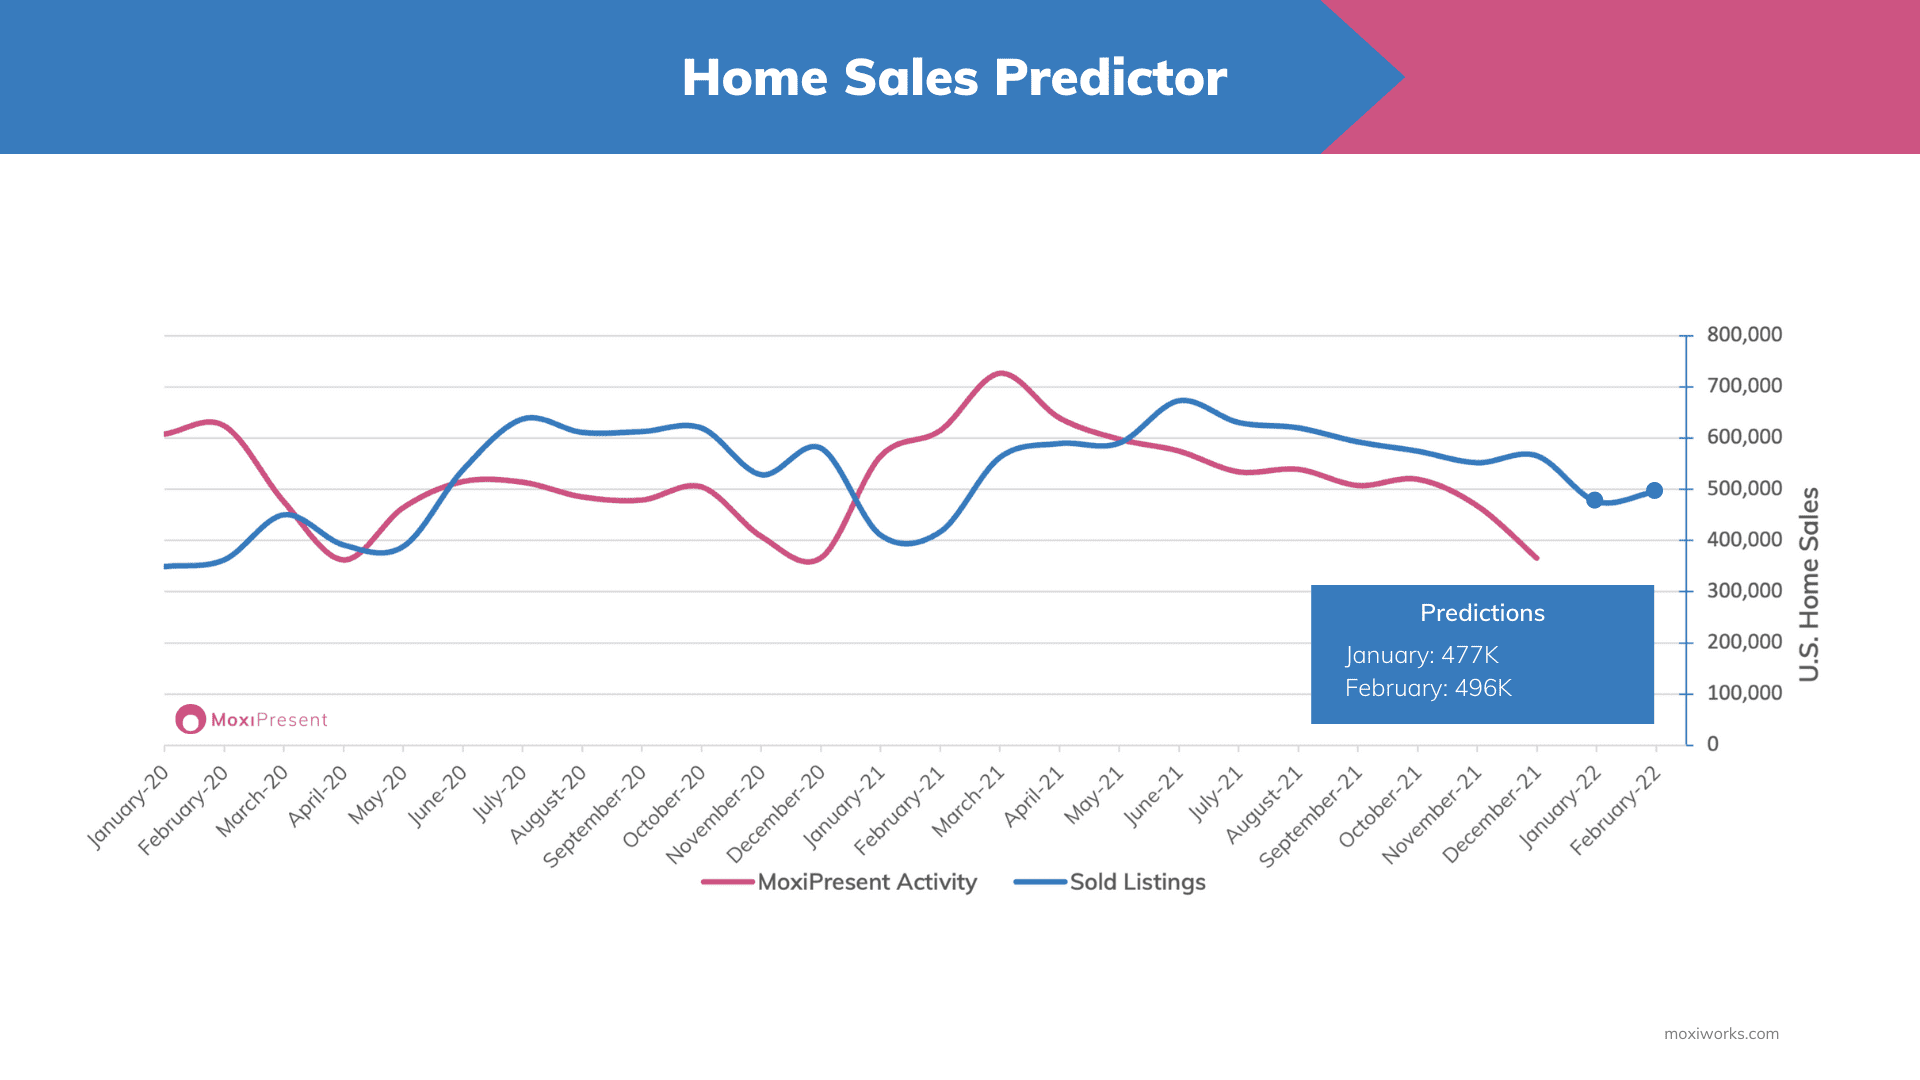 2022 Home Sales Predictor: Steady Stream of Home Sales to Kick off the New Year